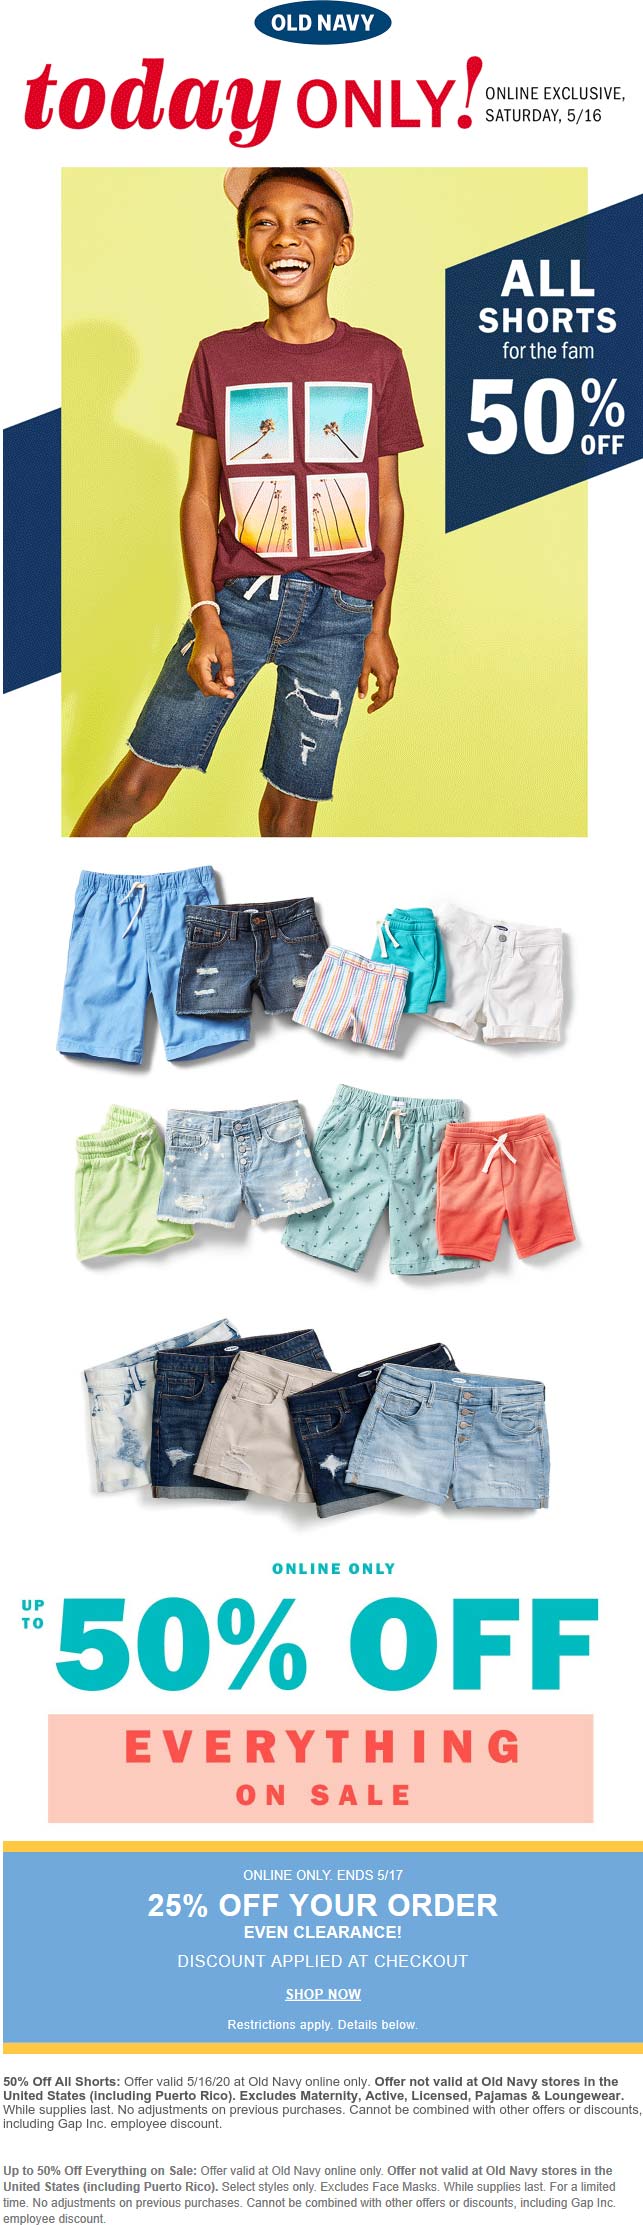 Old Navy stores Coupon  50% off all shorts today at Old Navy #oldnavy